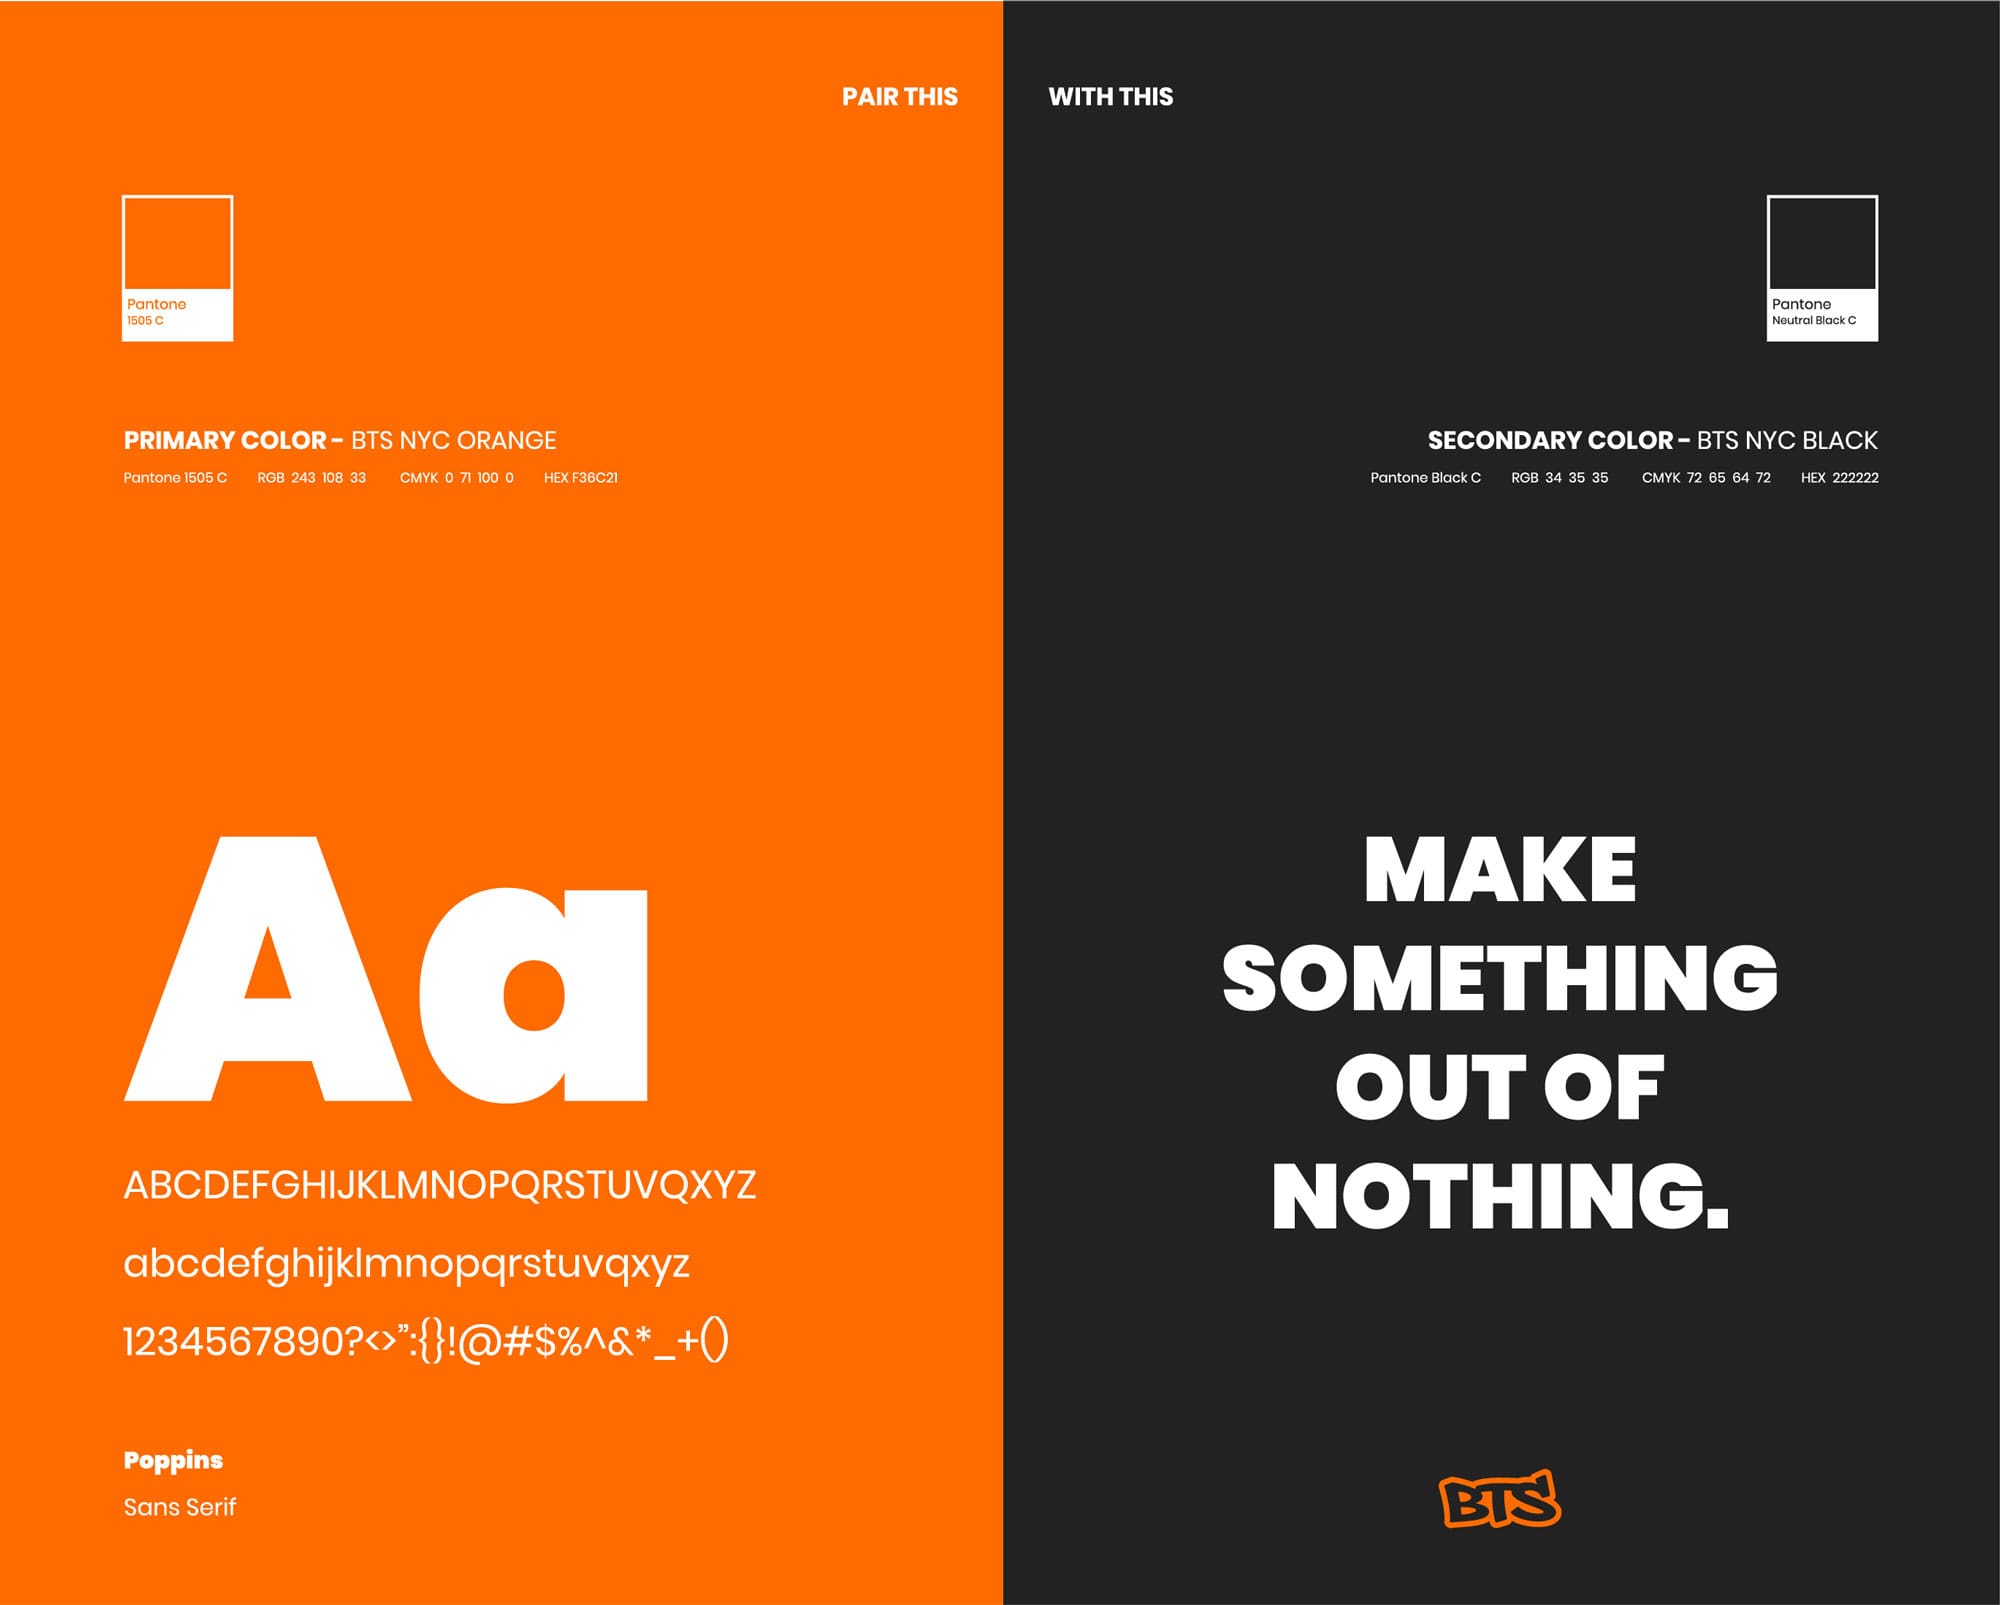 Beat the streets style guide with typography and colors